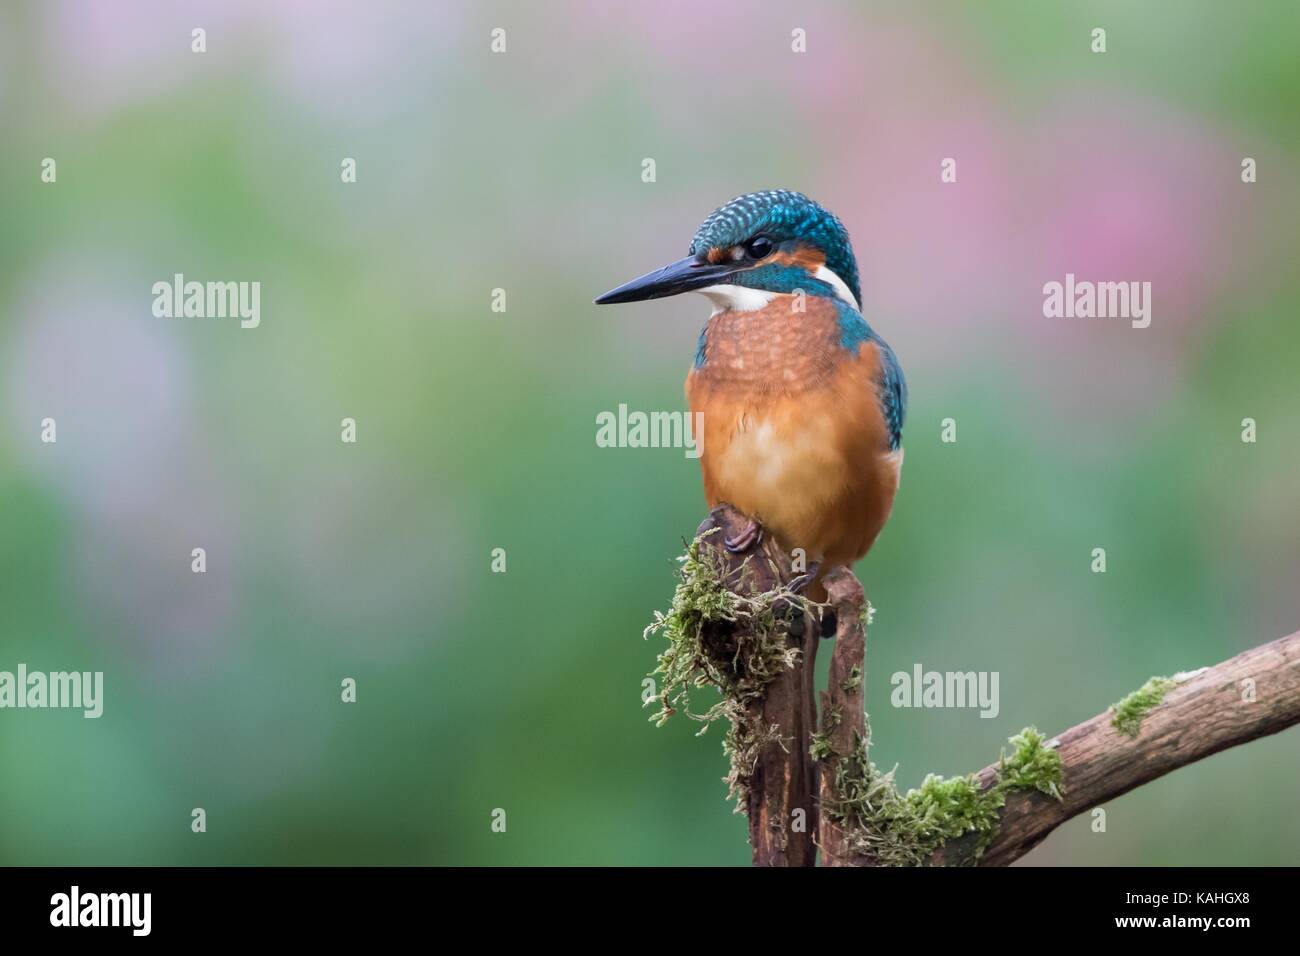 Common kingfisher (Alcedo atthis), Young bird, on branch, Hesse, Germany Stock Photo